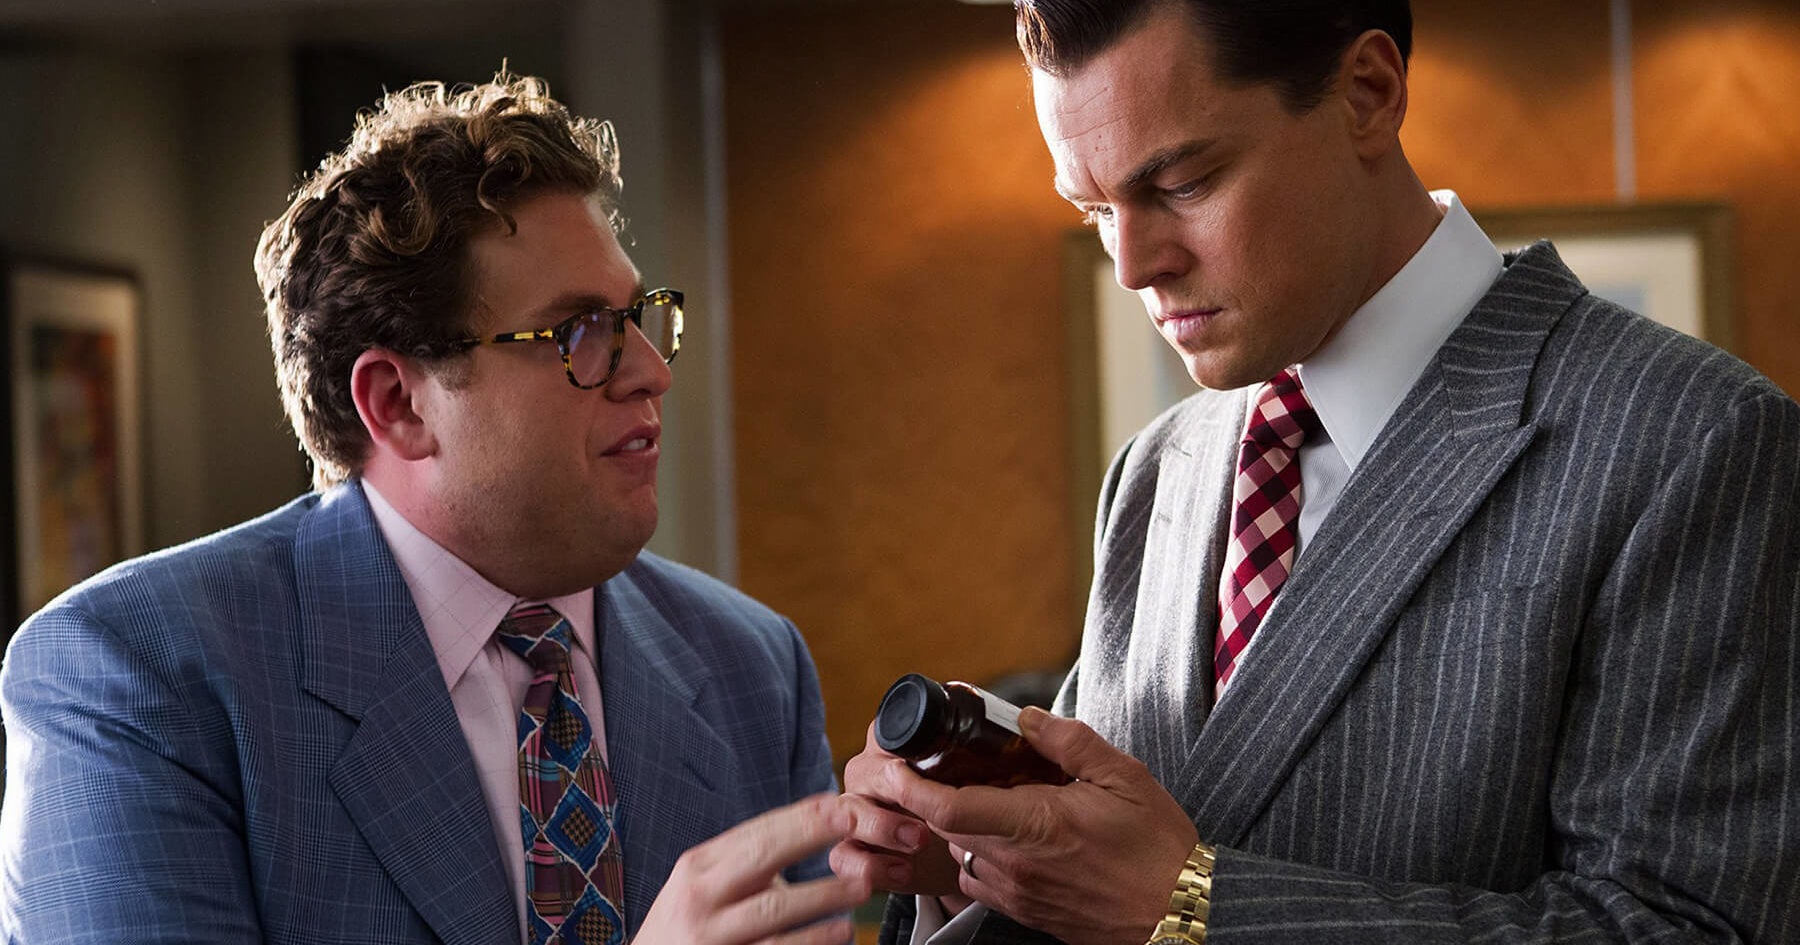 The 5 Most Exciting Things About 'The Wolf of Wall Street' Trailer